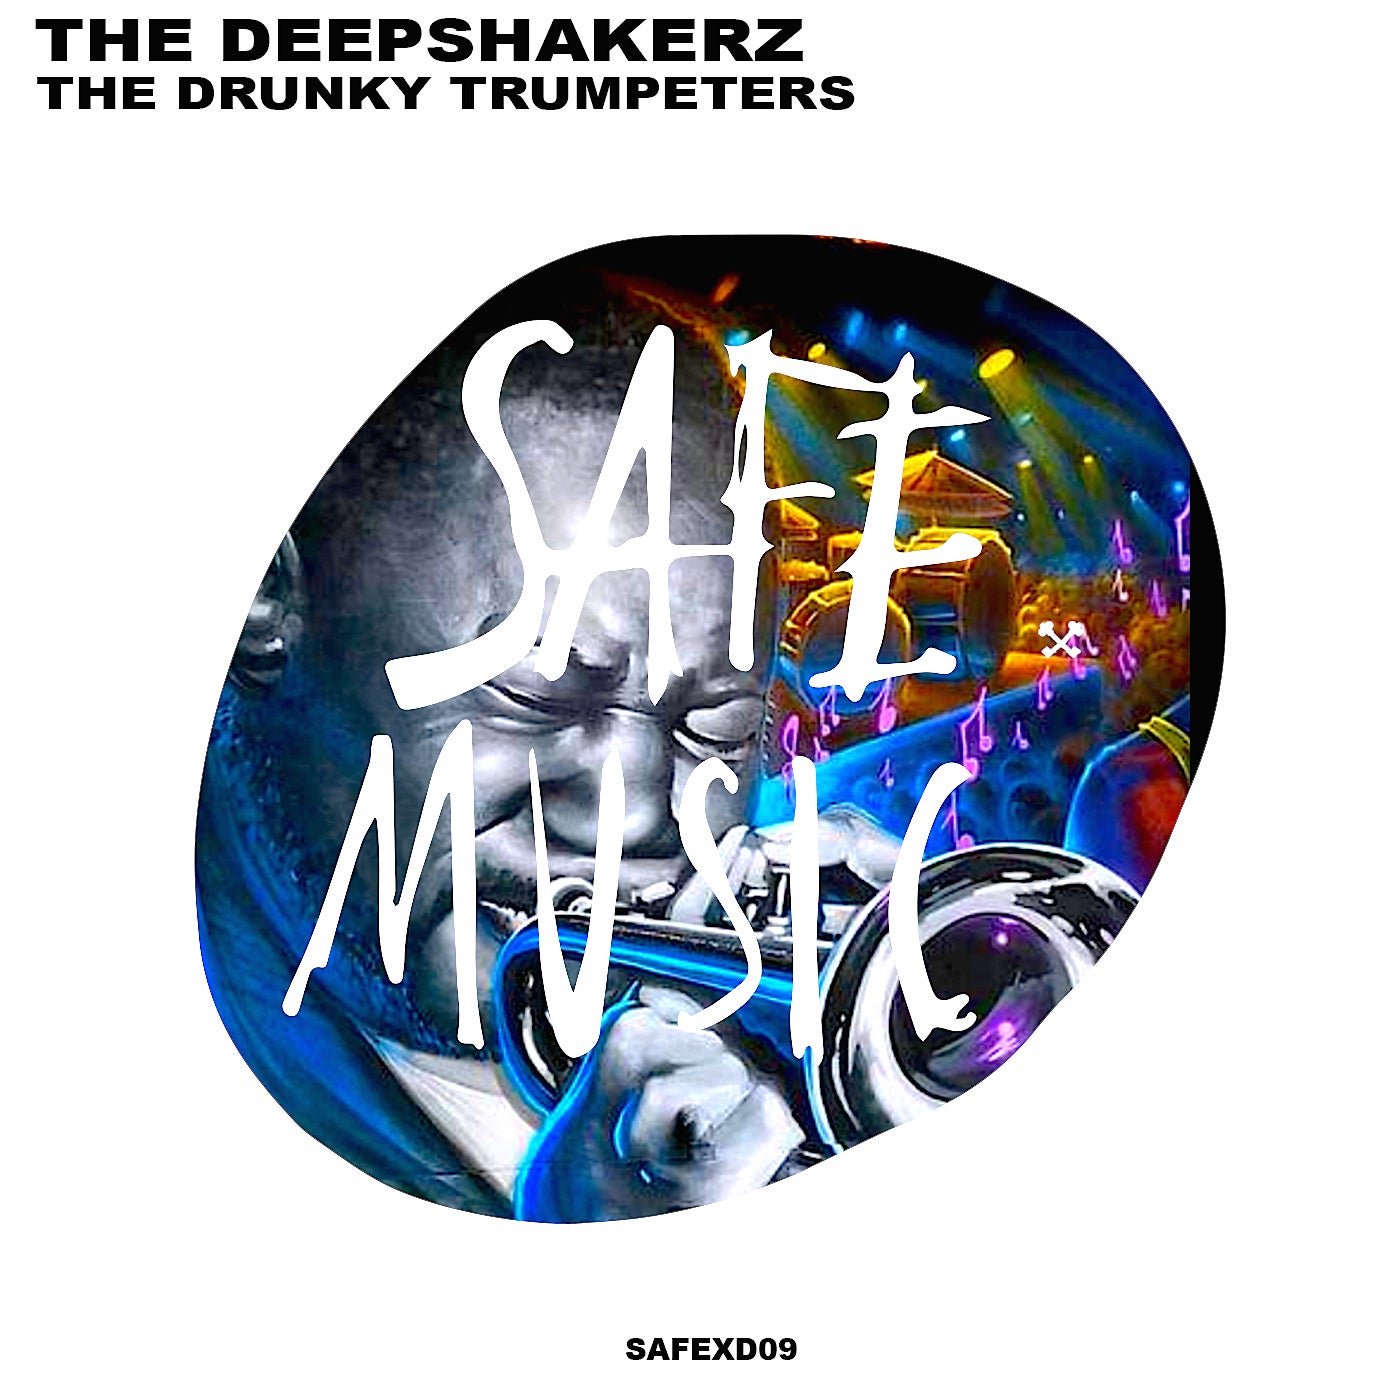 The Deepshakerz - The Drunky Trumpeters [SAFEXD09B]